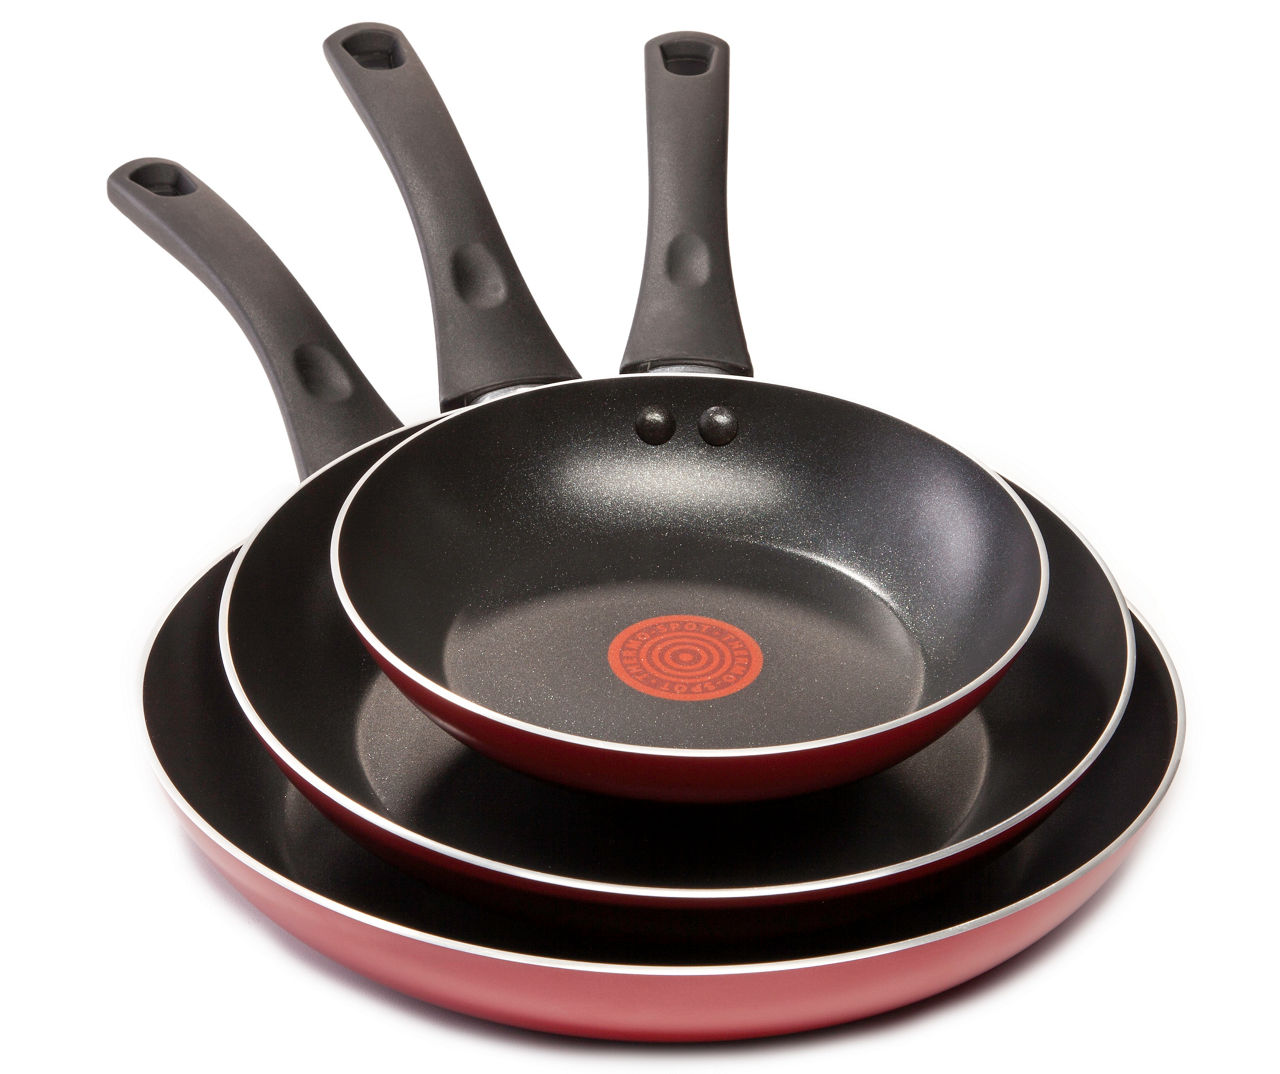 T-Fal Specialty 3 Piece Fry Pan Set